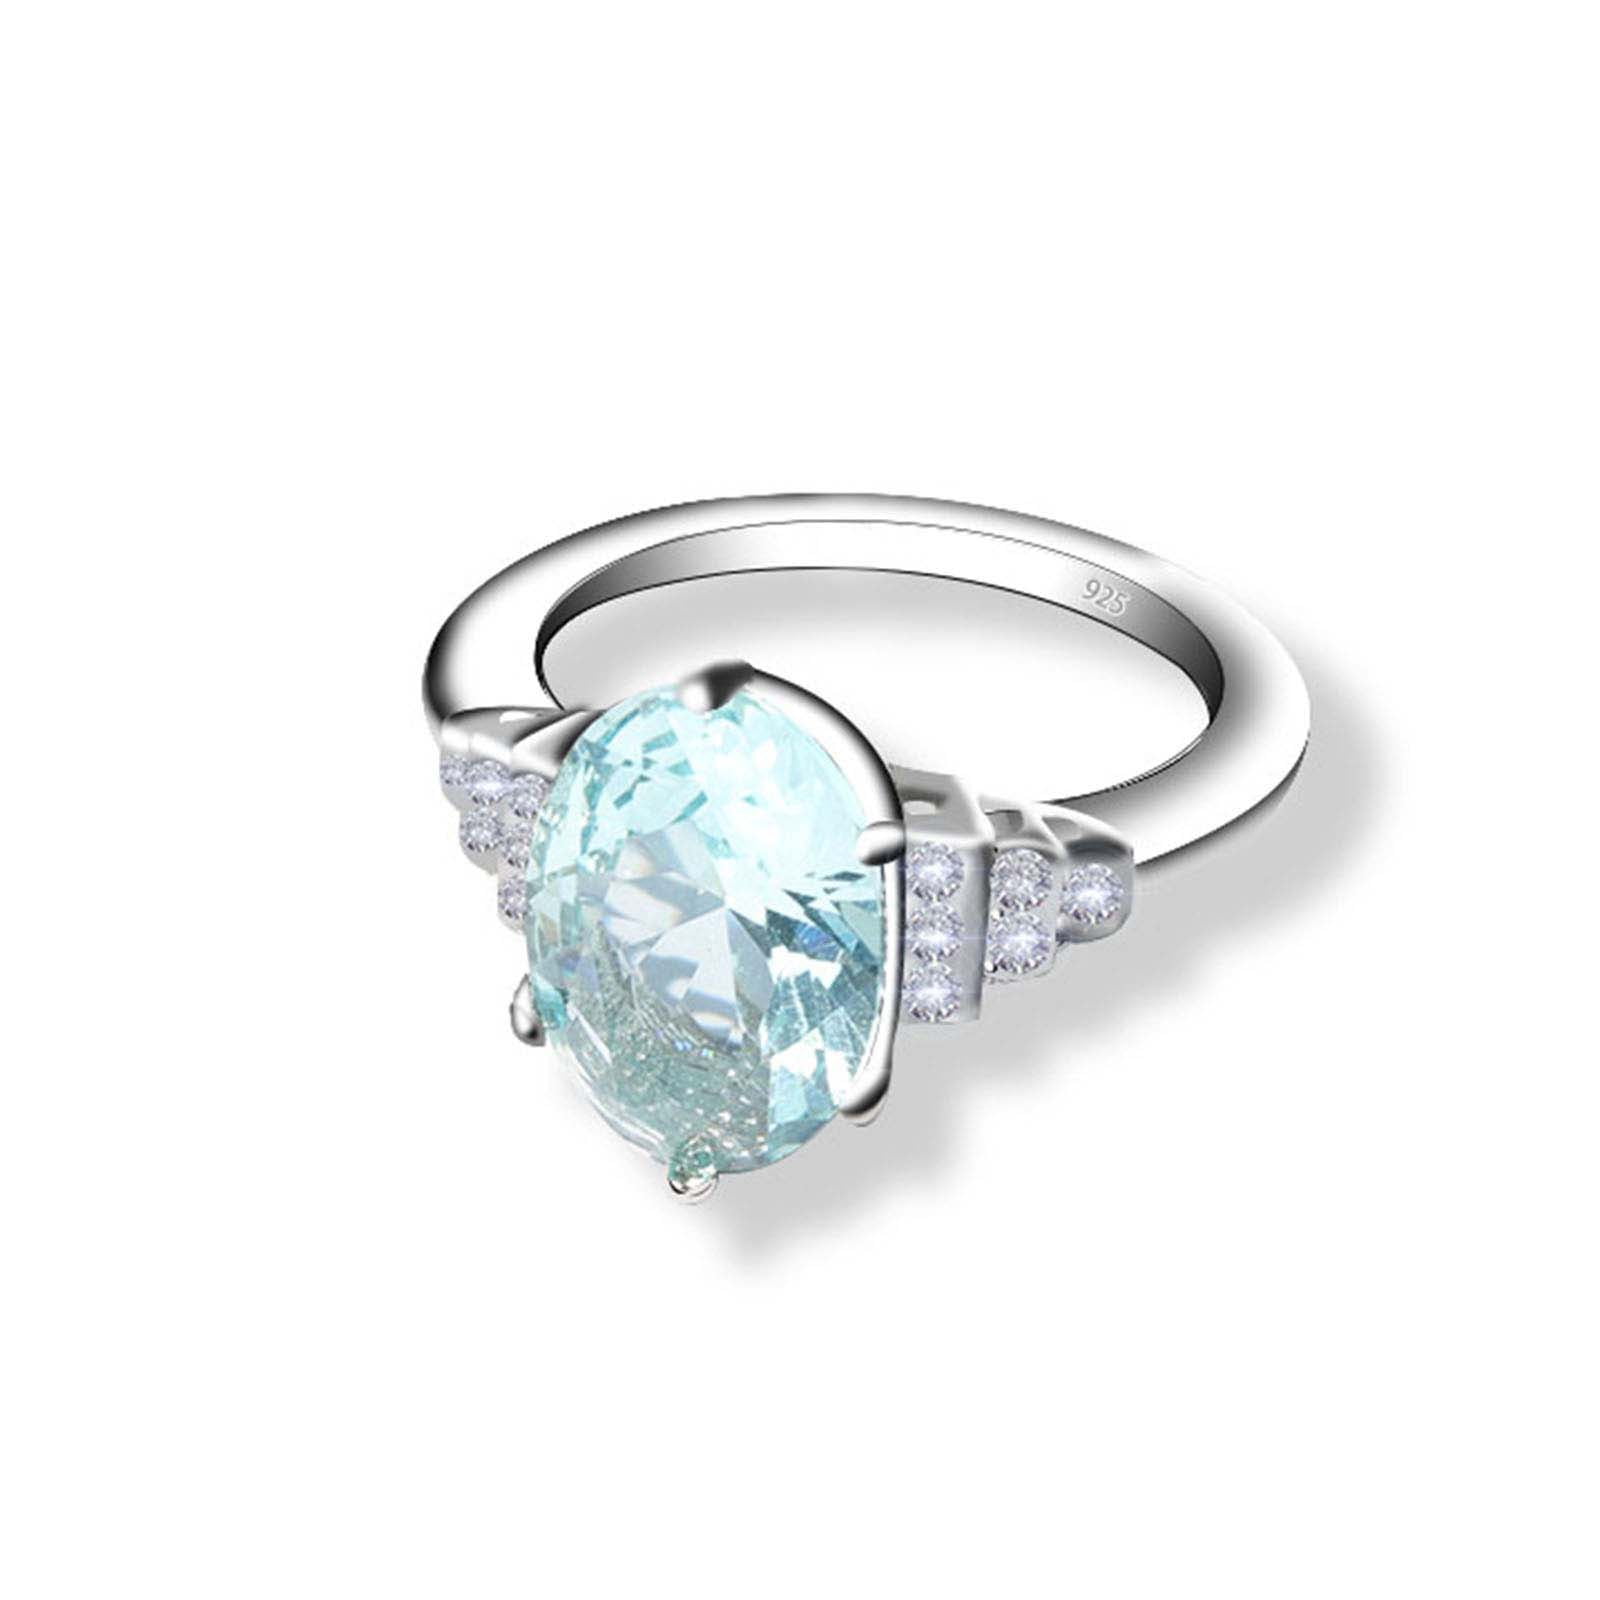 Details about   Certified Natural Blue Topaz 925 Sterling Silver Ring  Adjustable Women Gift